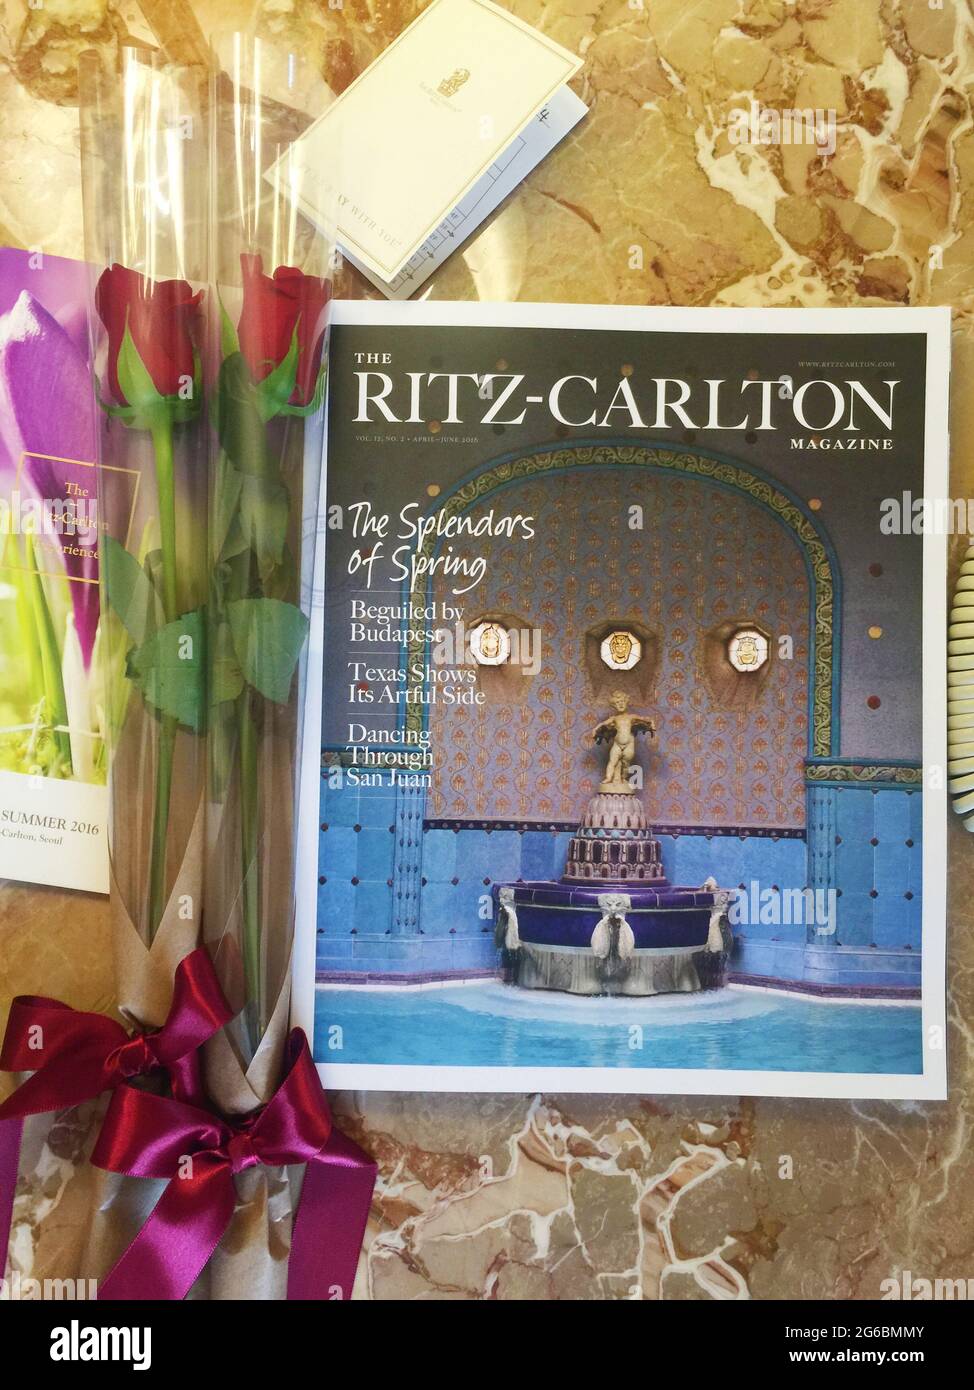 Seoul, South Korea - April 23, 2016: The Ritz Carlton Hotel Magazine and roses given at check in. Stock Photo